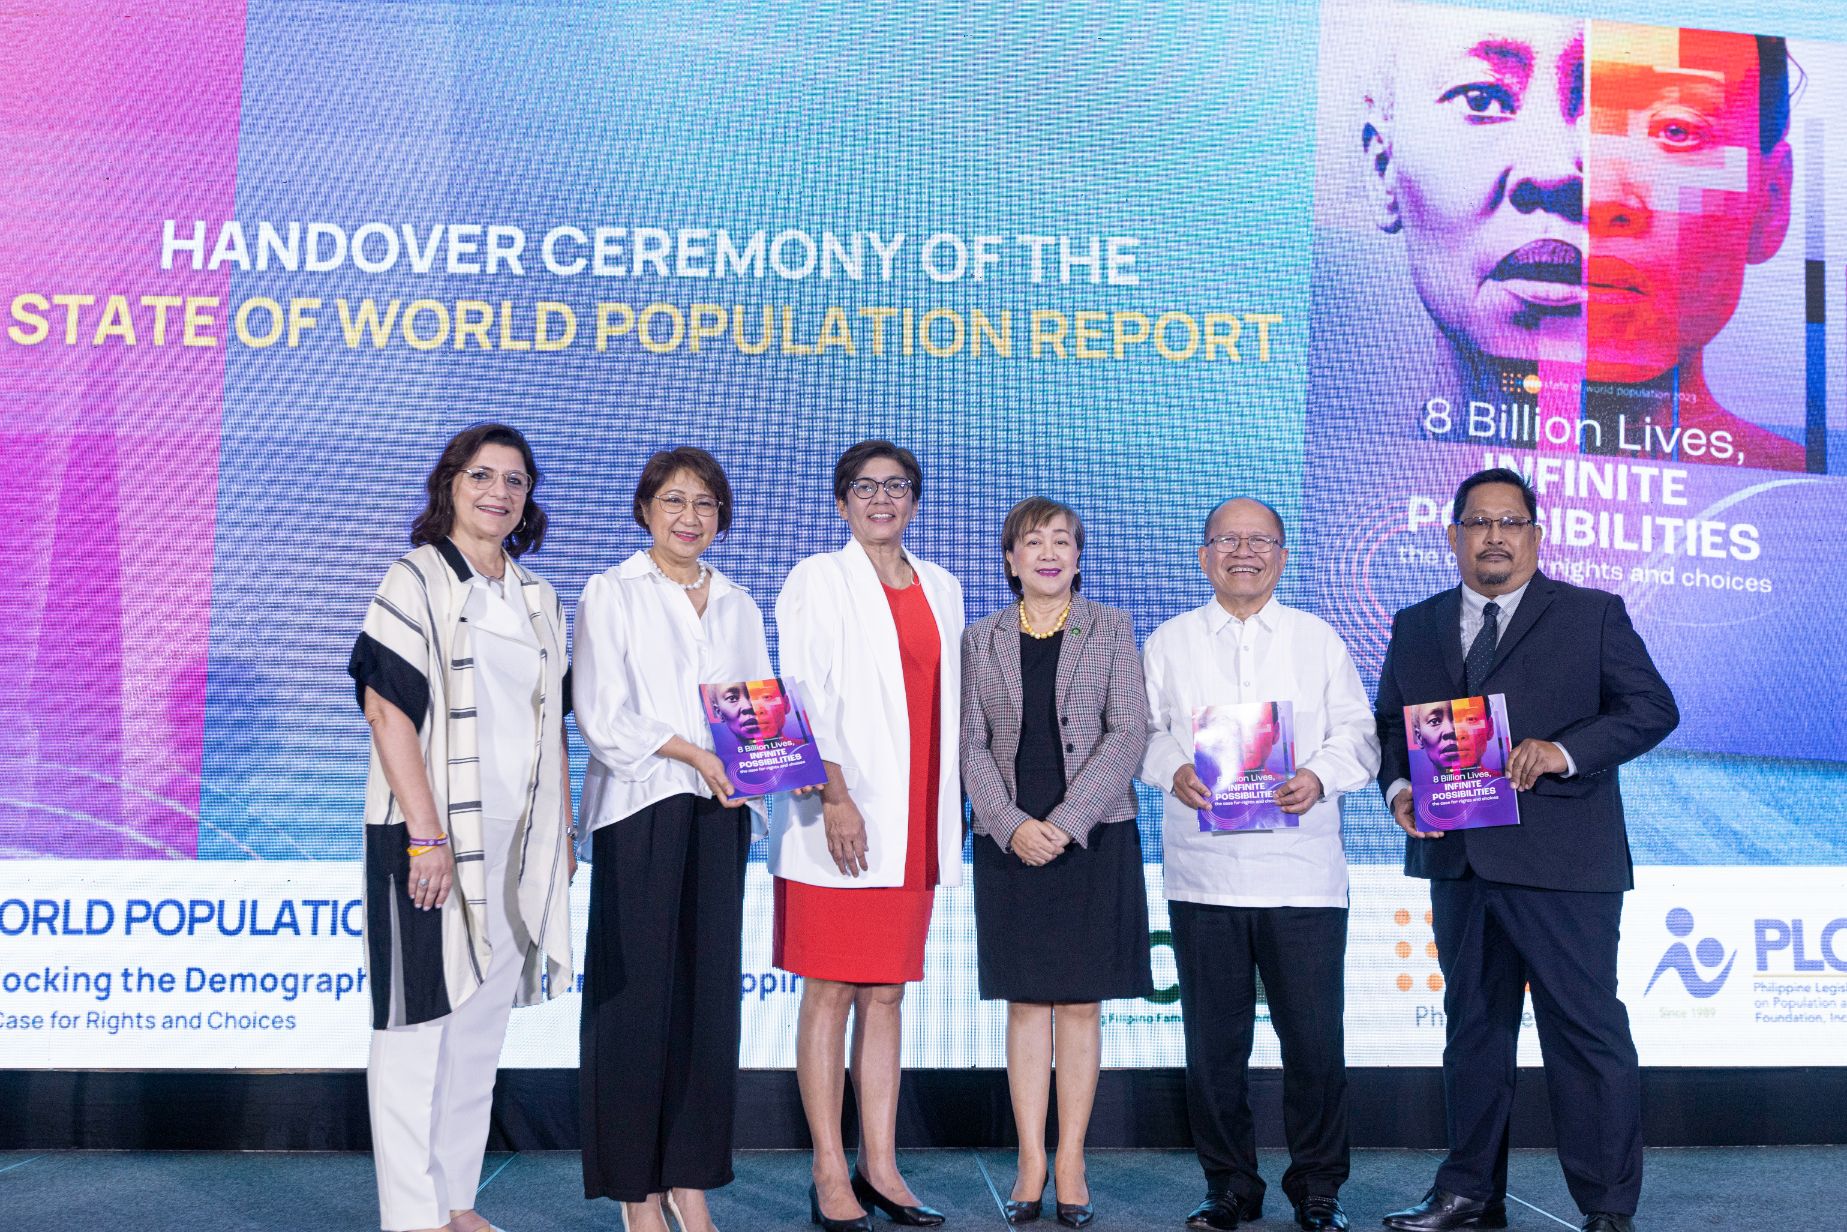 Ceremonial turnover of the State of World Population Report